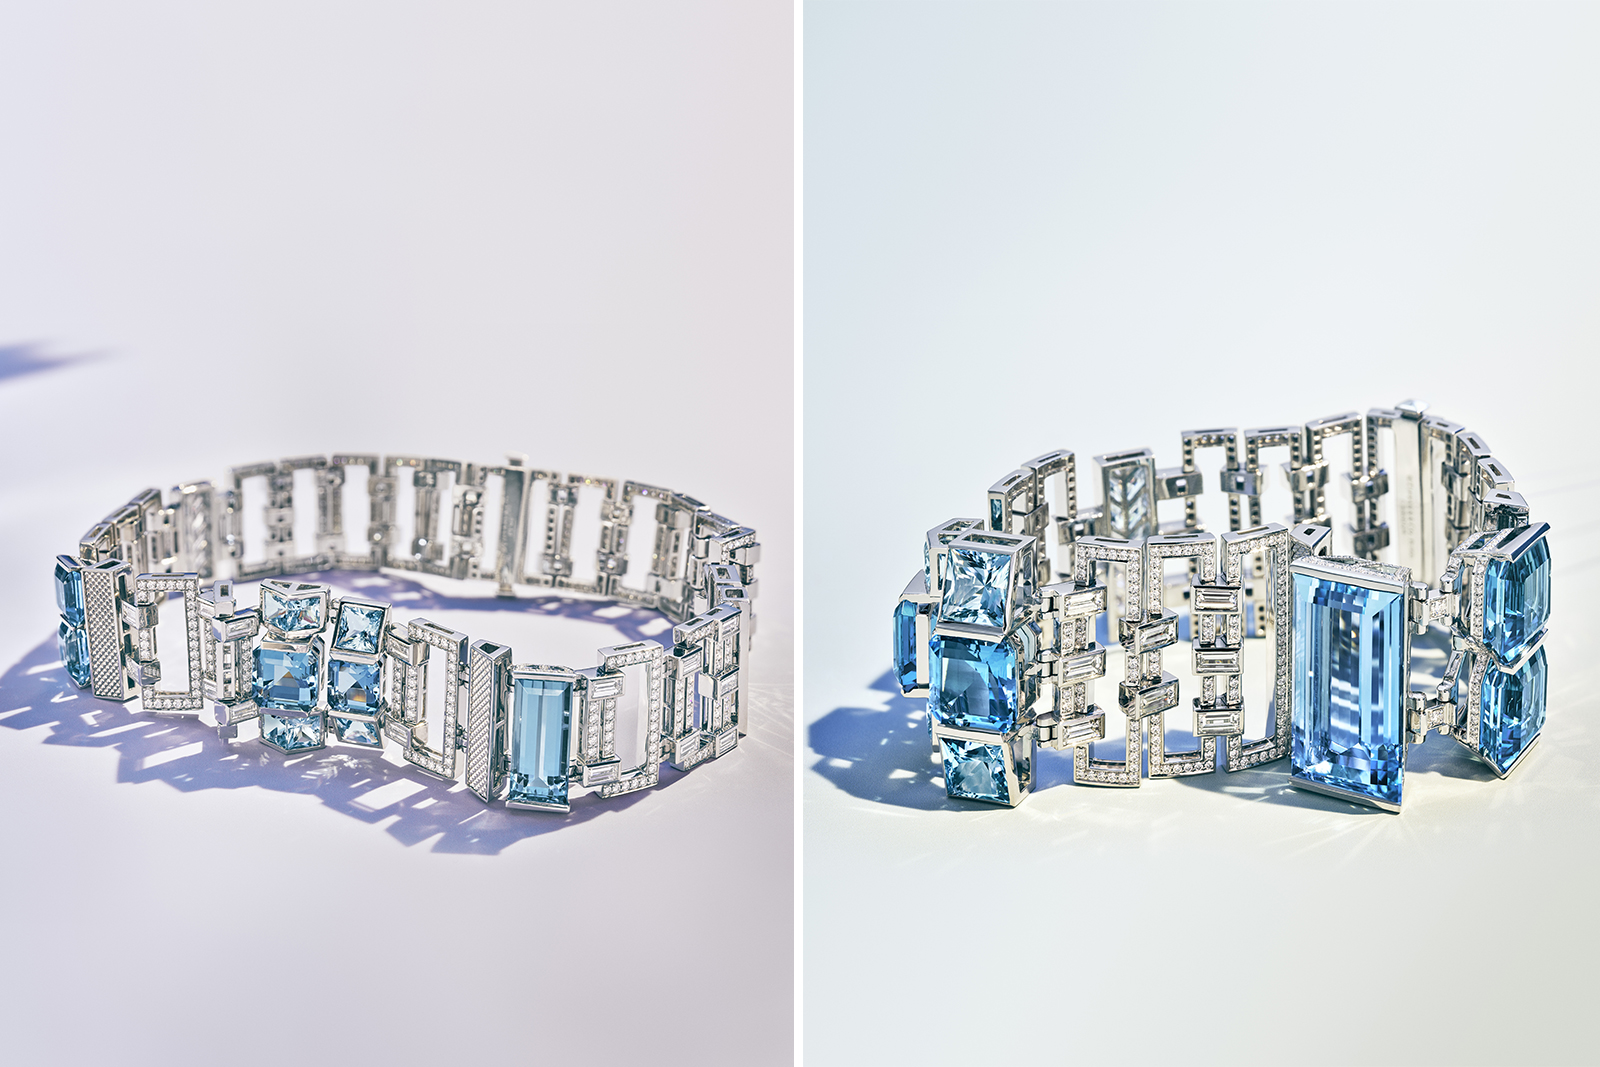 Tiffany & Co. Blue Book 2018 Collection necklace in platinum with mixed-cut aquamarines, over 26 total carats, and mixed-cut diamonds, over 26 total carats and bracelet in platinum with mixed-cut aquamarines, over 68 total carats, and mixed-cut diamonds, over 10 total carats